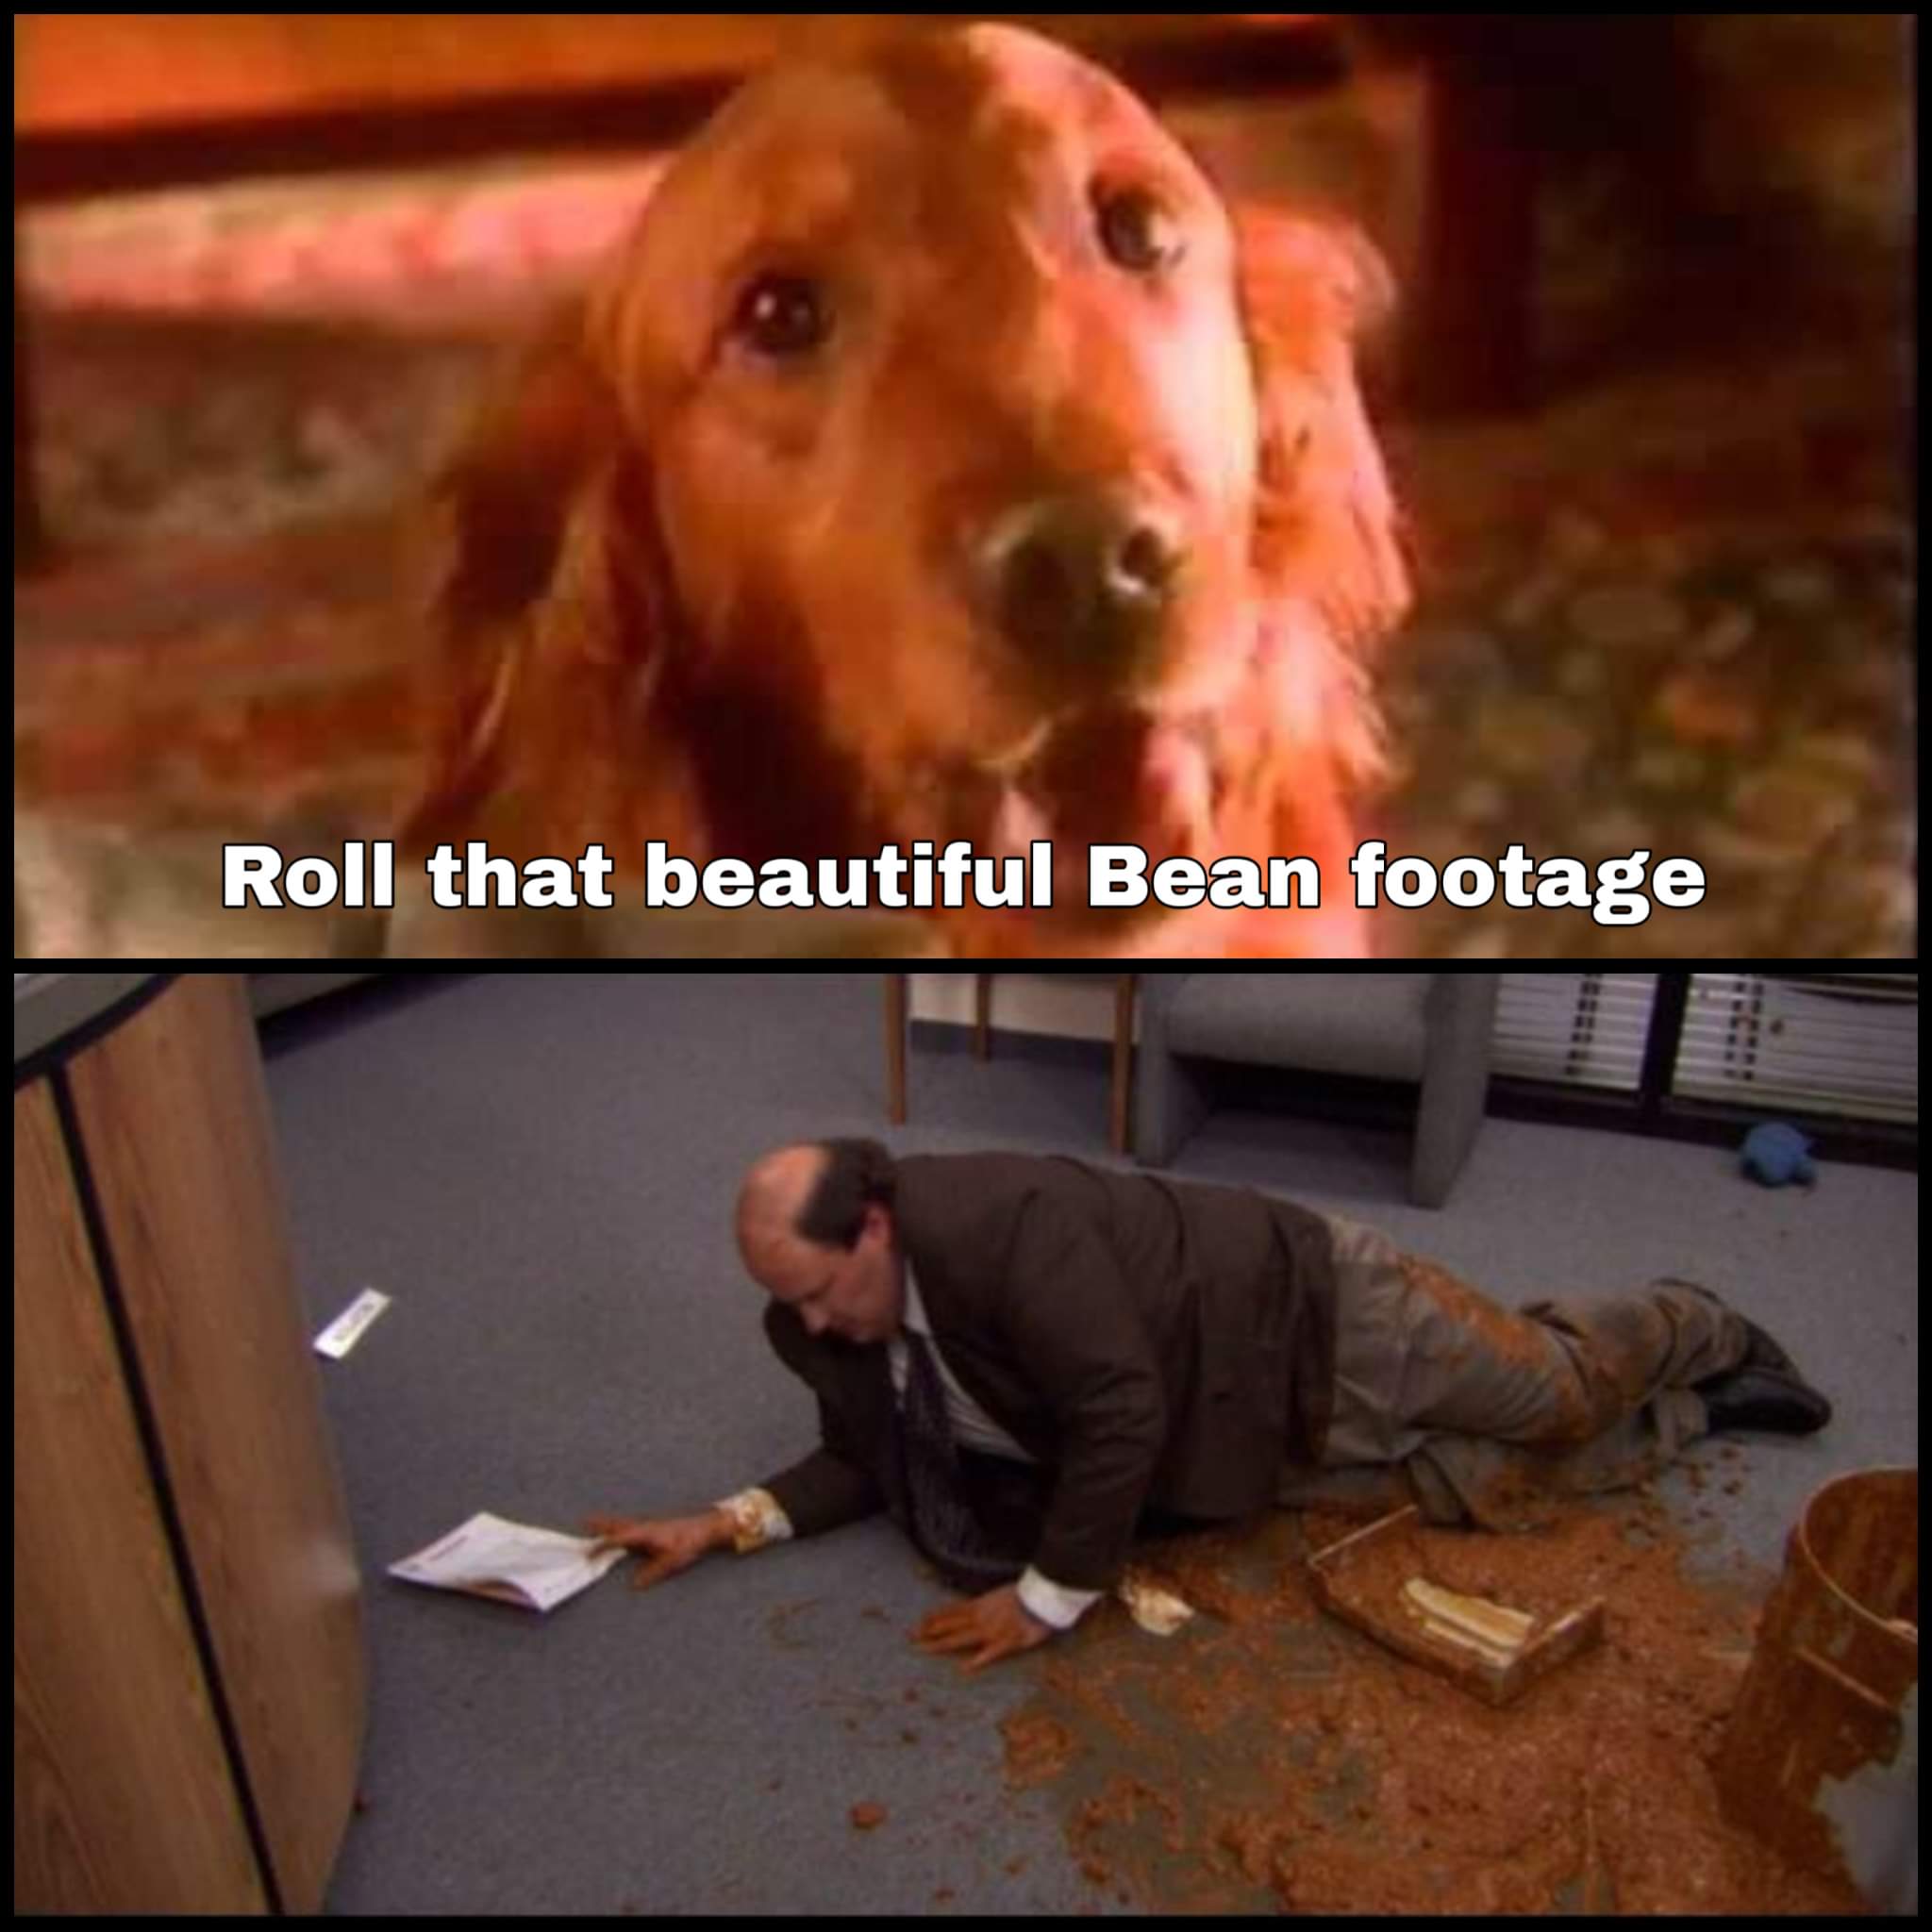 Roll that beautiful bean footage